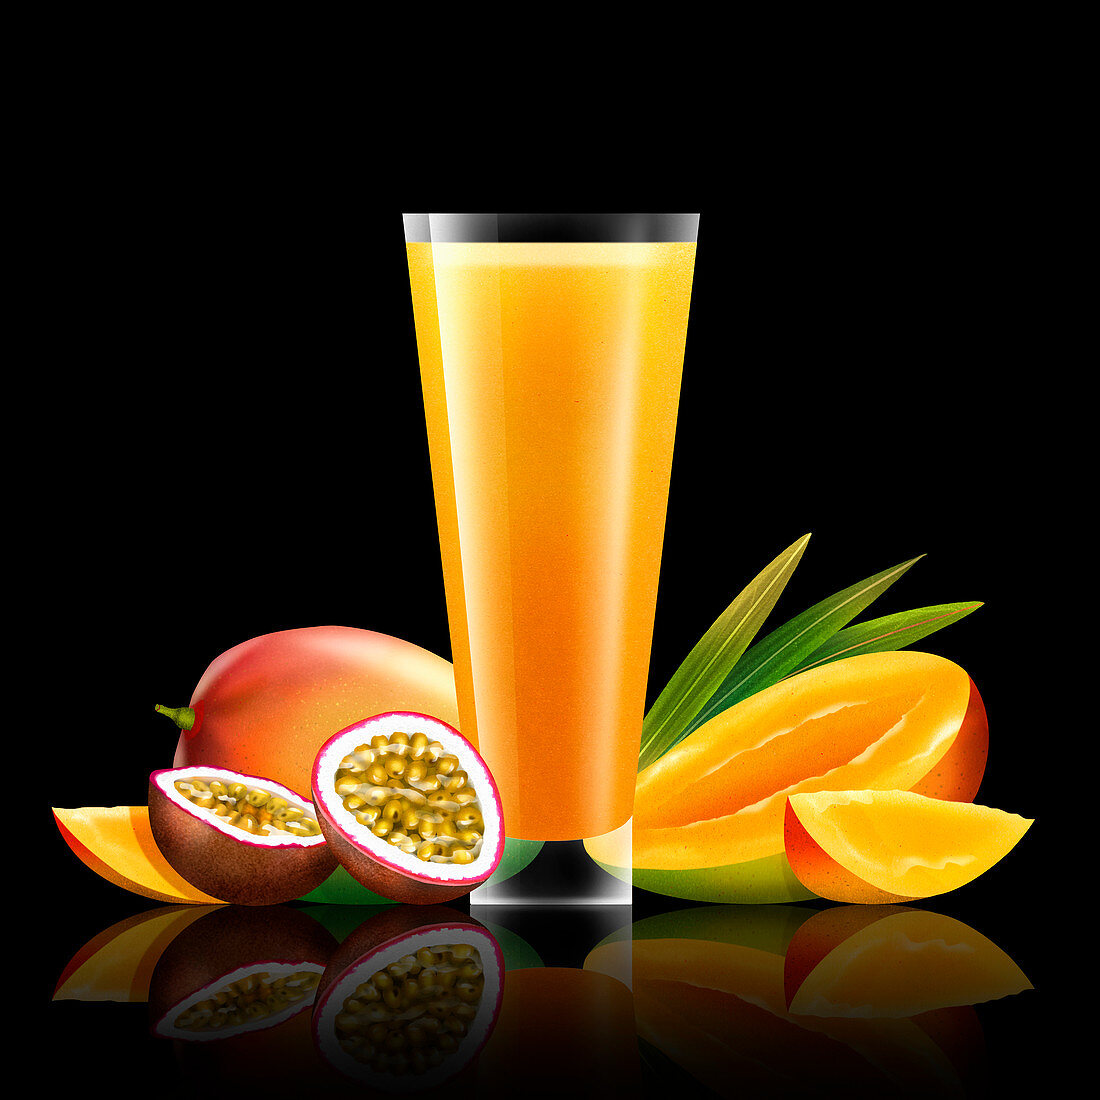 Fruit with glass of juice, illustration